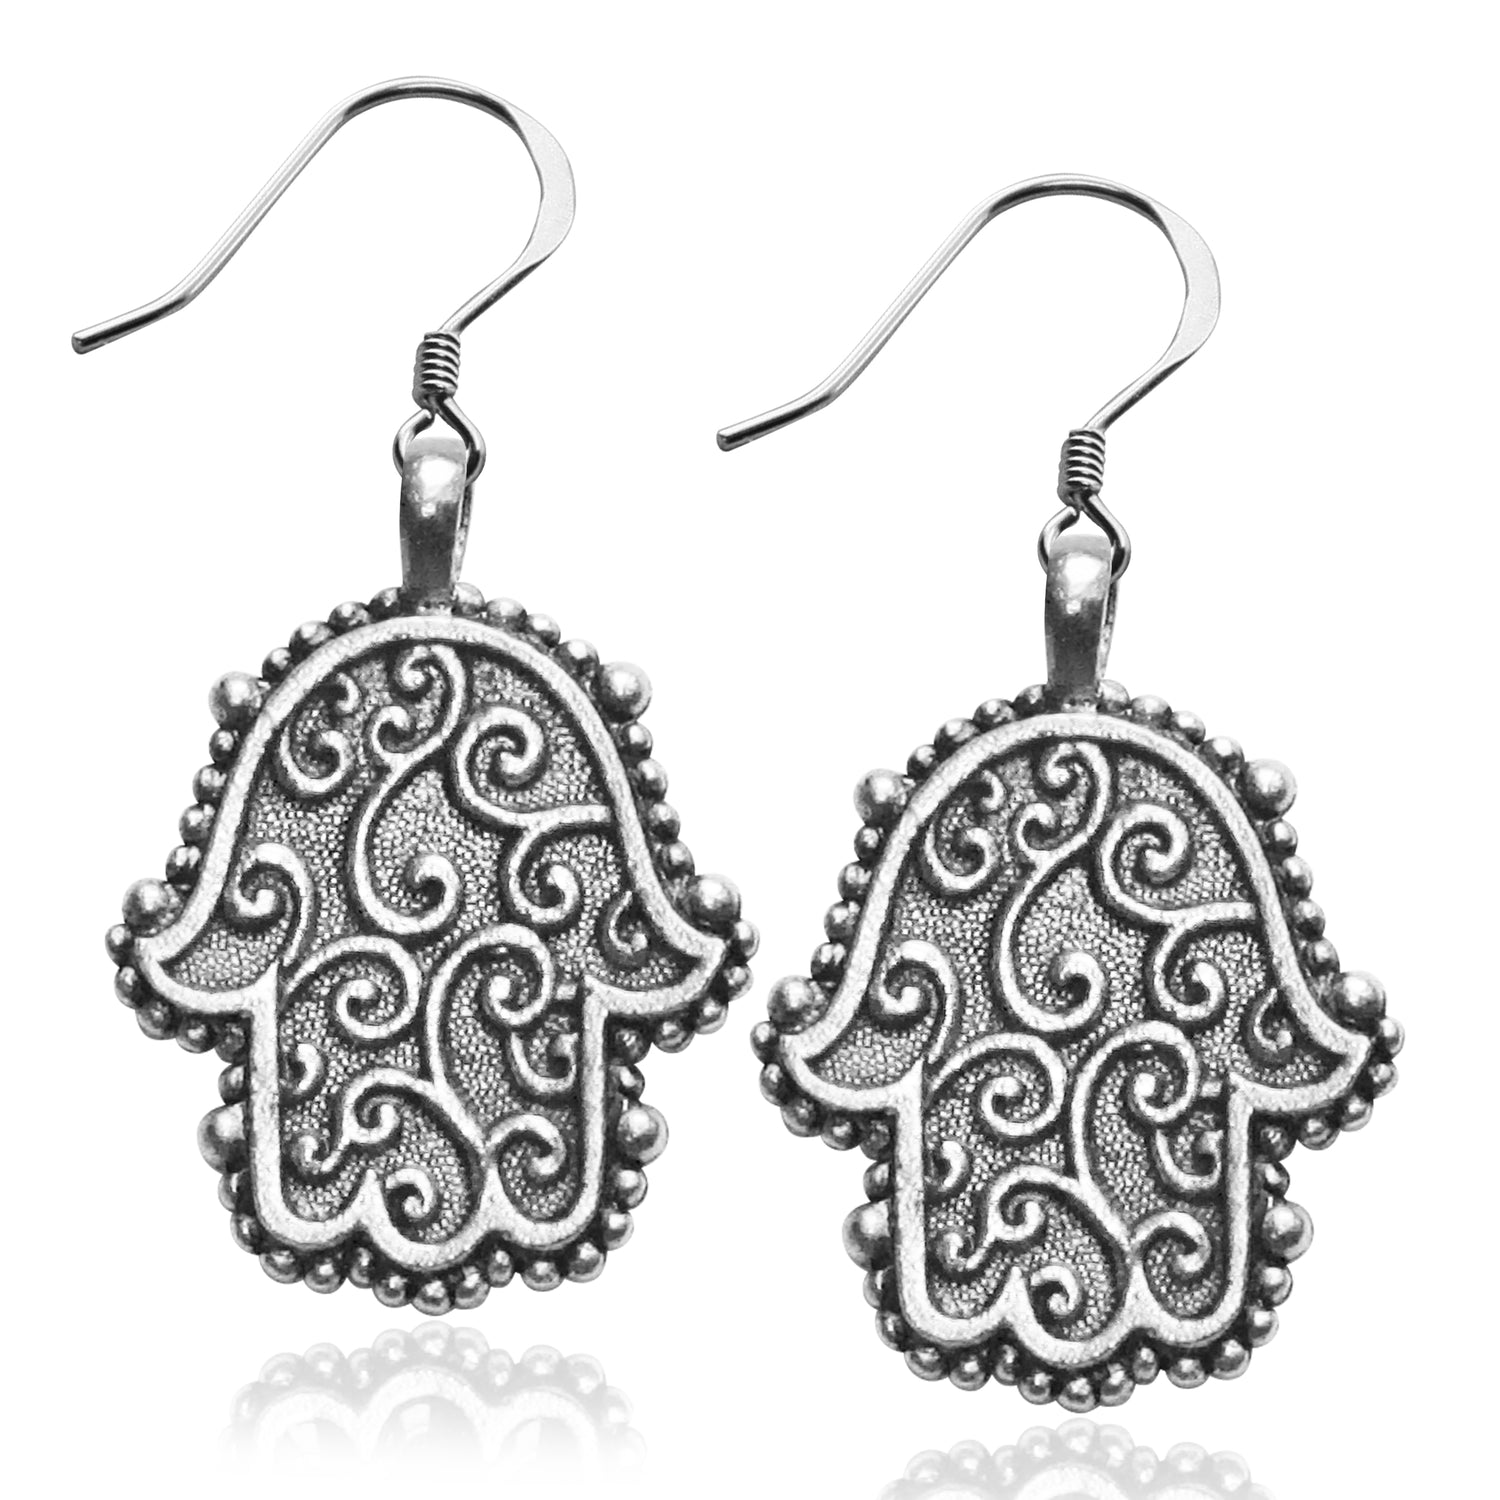 Whimsical Gifts | Hamsa Hand Charm Earrings in Silver Finish Back View | Religious & Spiritual |  | Jewelry